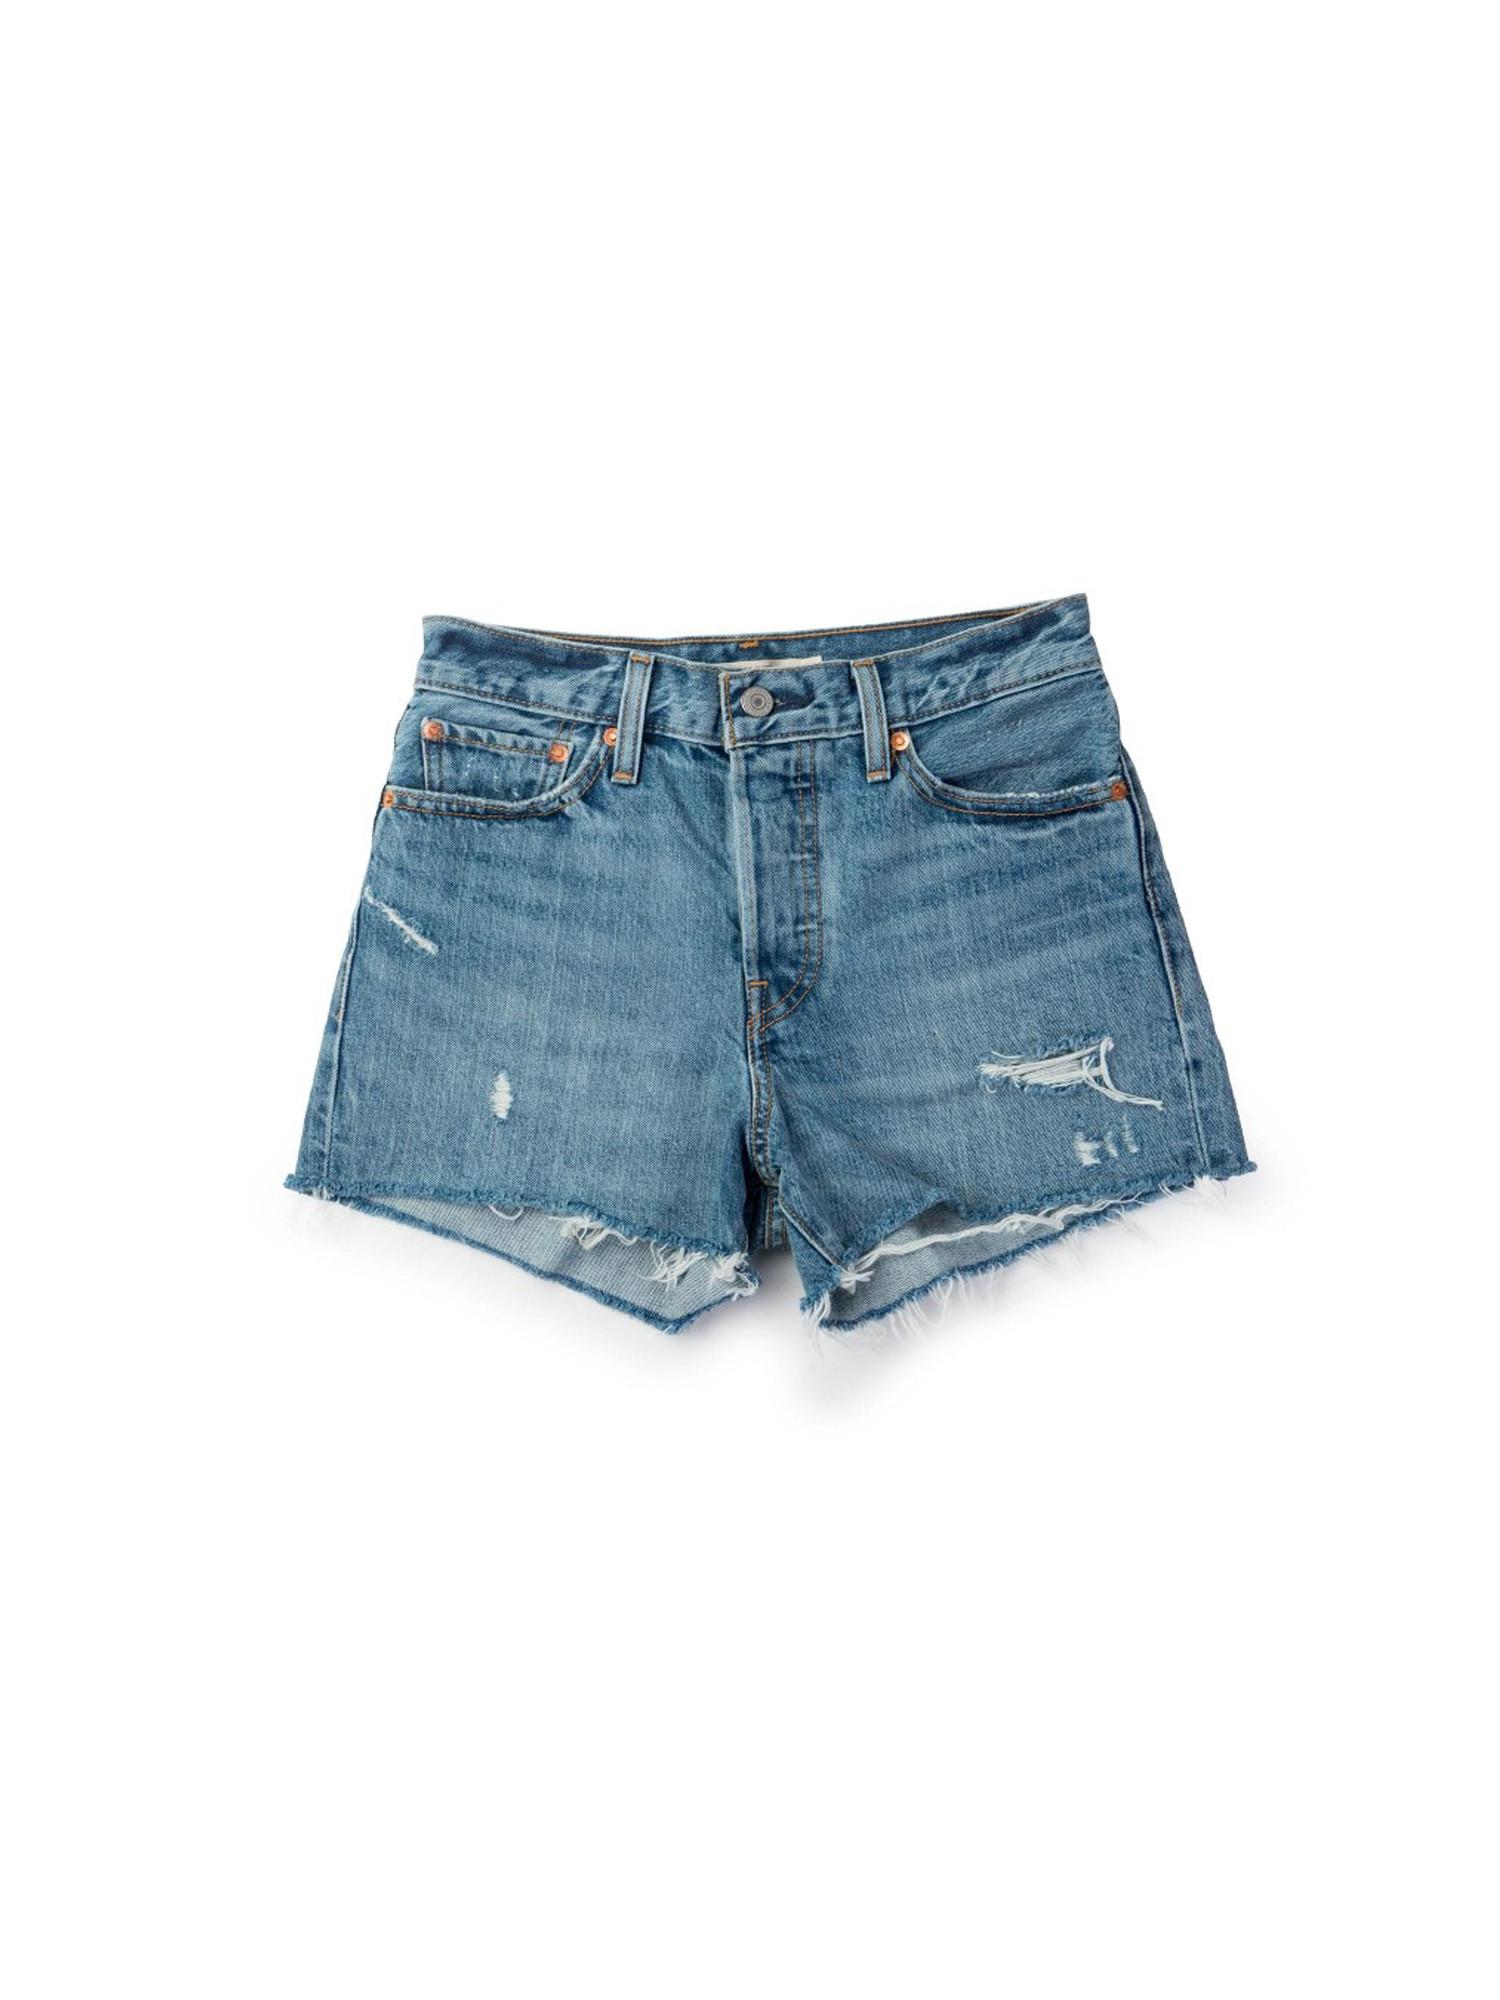 levi's wedgie shorts